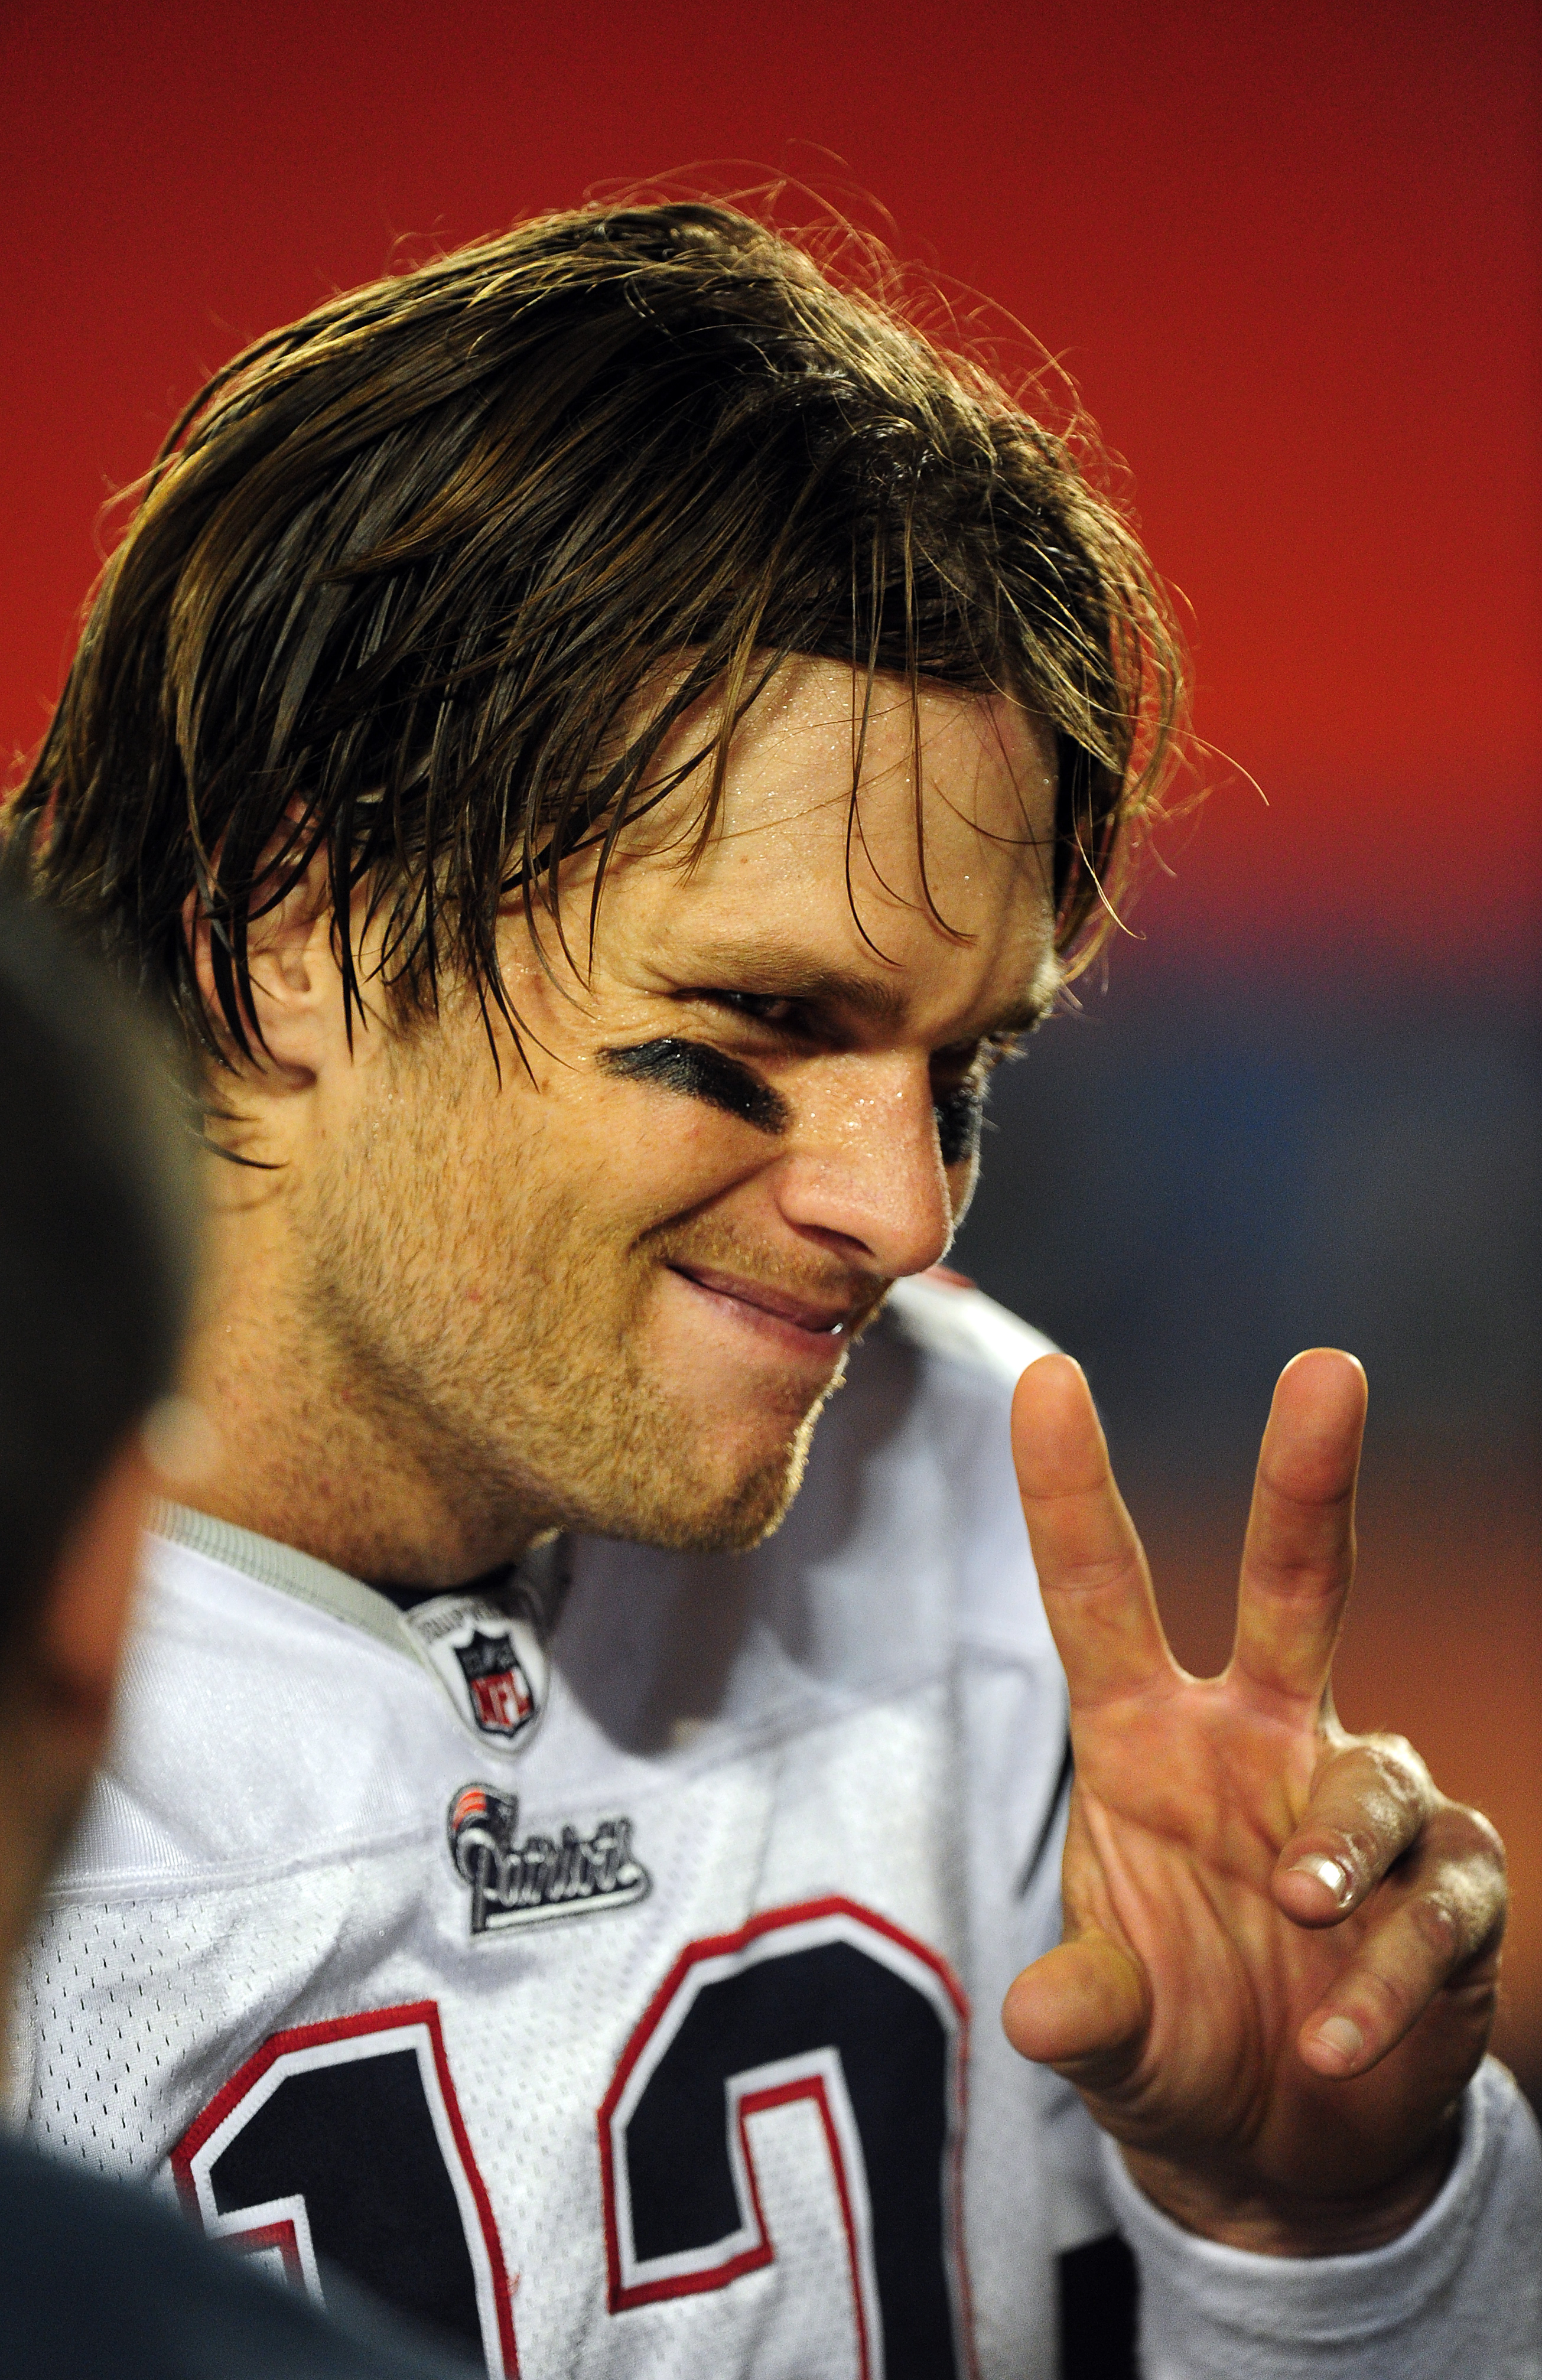 MIAMI - OCTOBER 4: Tom Brady #12 of the New England Patriots celebrates after the game against the Miami Dolphins at Sun Life Field on October 4, 2010 in Miami, Florida. (Photo by Scott Cunningham/Getty Images)